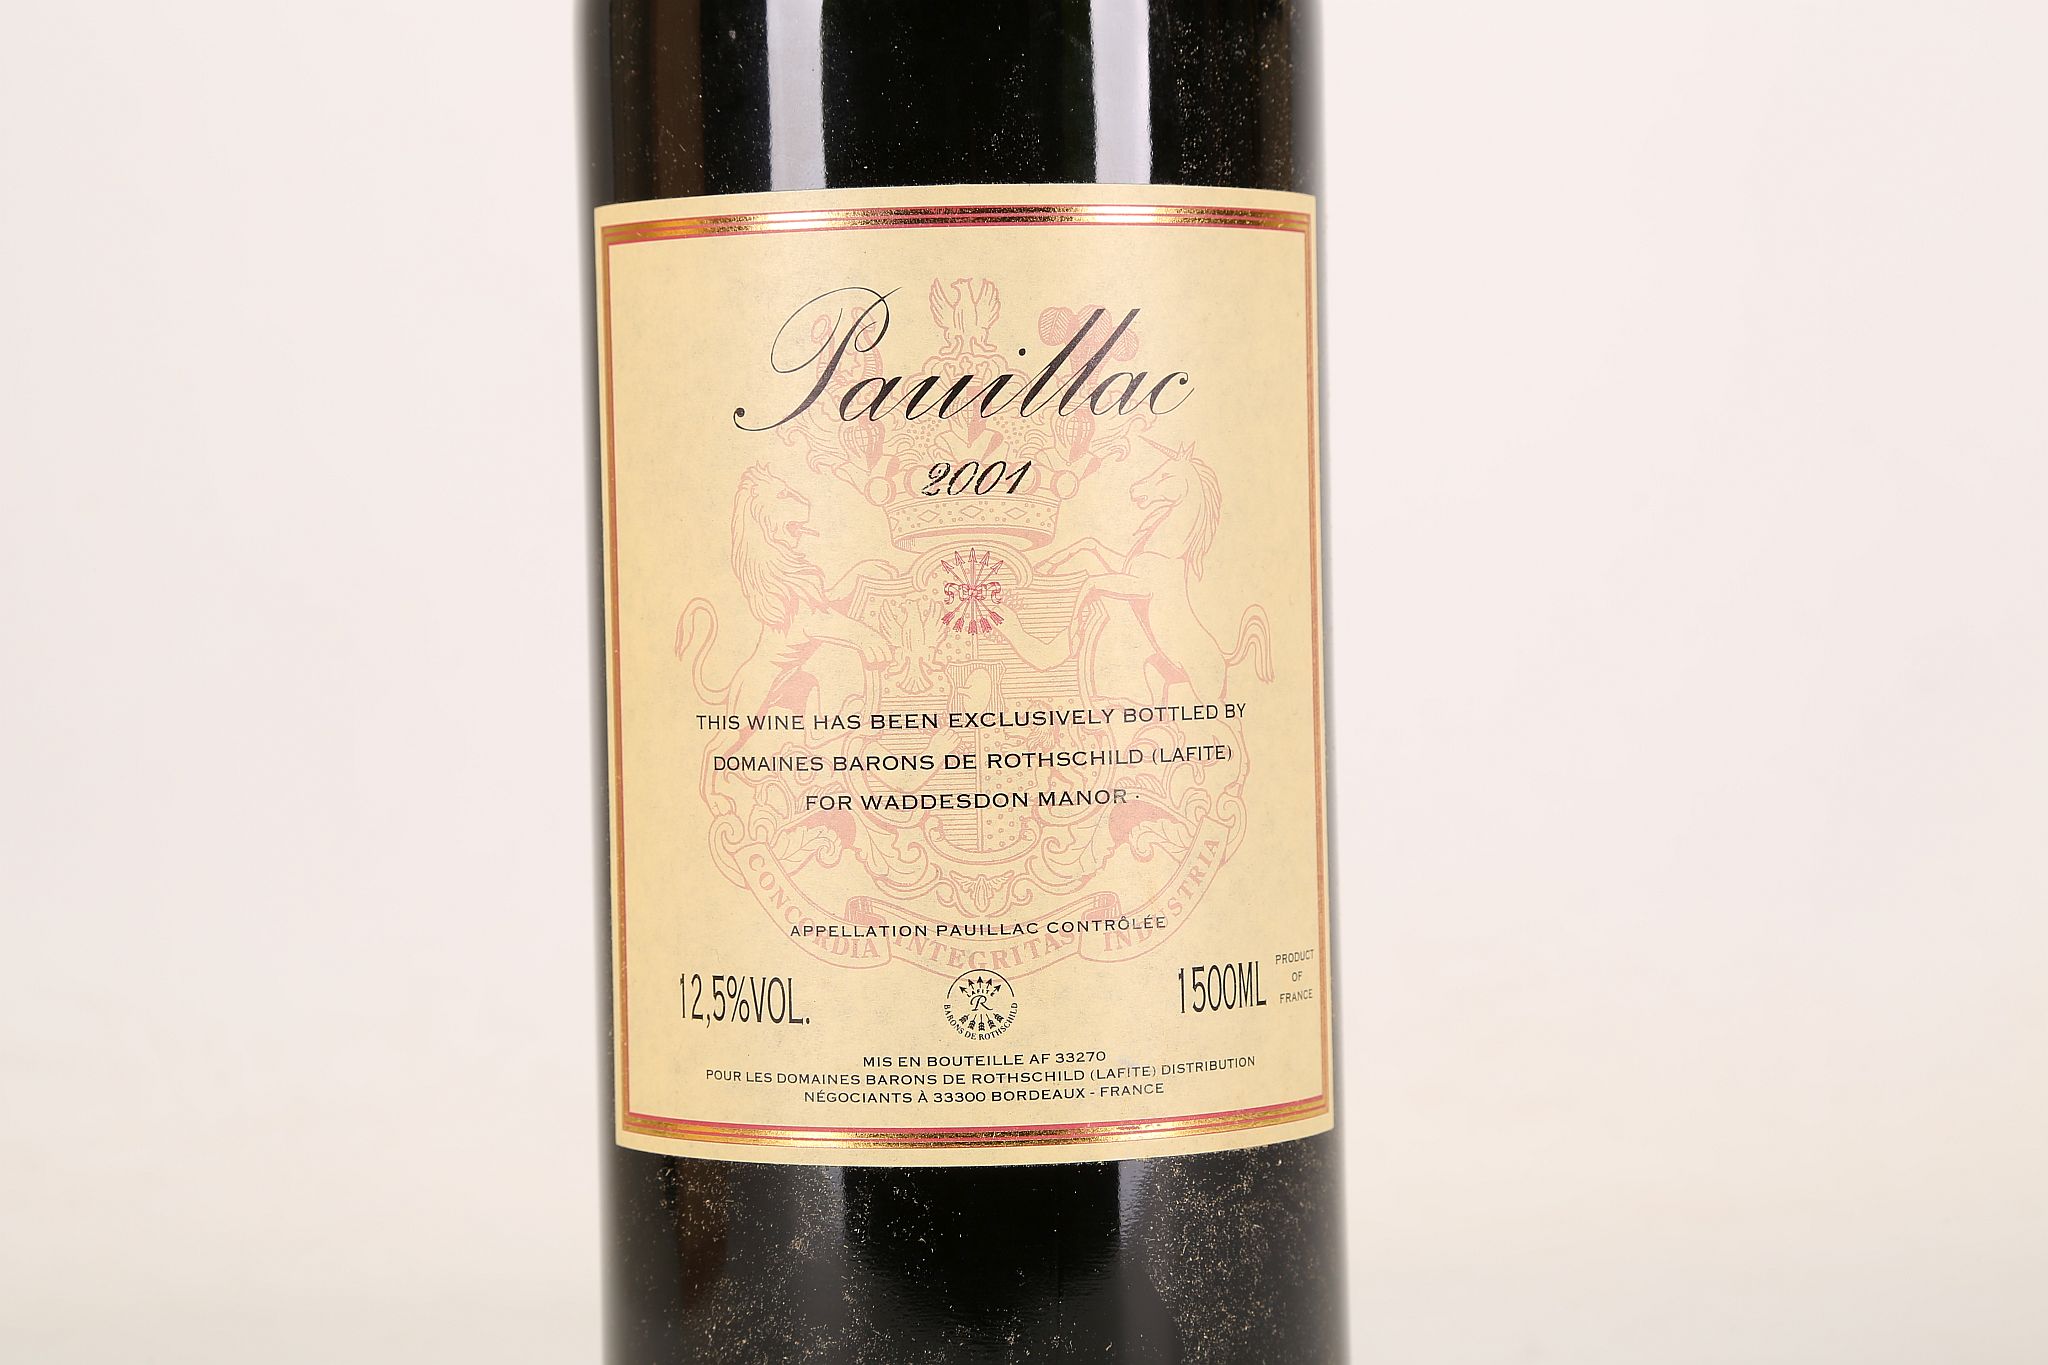 Barons de Rothschild (Lafite), 2001, Pauillac, bottles for Waddesdon Mayor (Now owned by The - Image 3 of 5